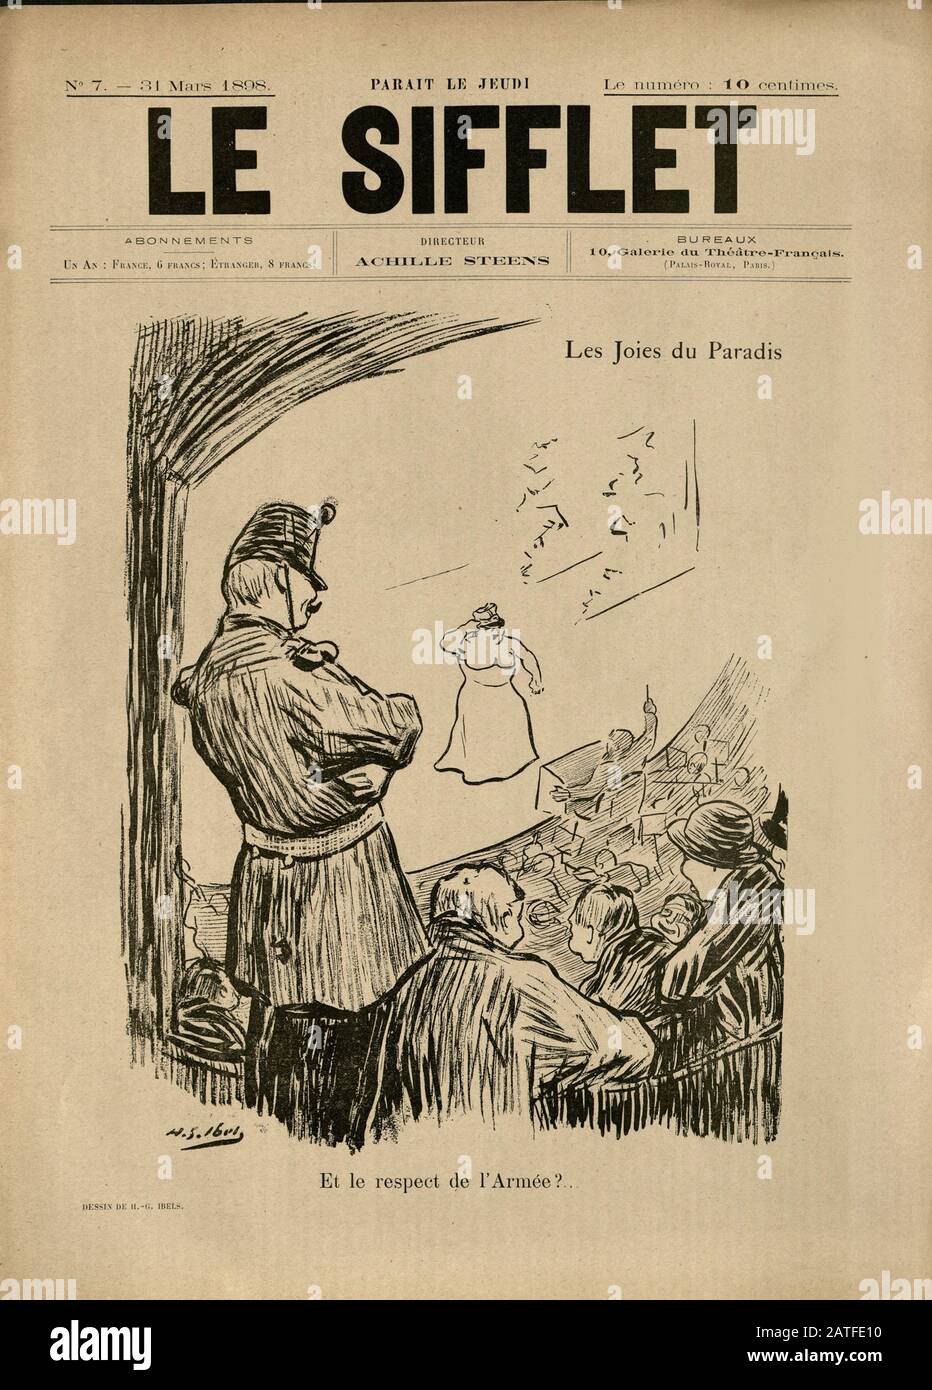 The Dreyfus Affair 1894-1906 - Le Sifflet, March 31, 1898 -  French illustrated newspaper Stock Photo